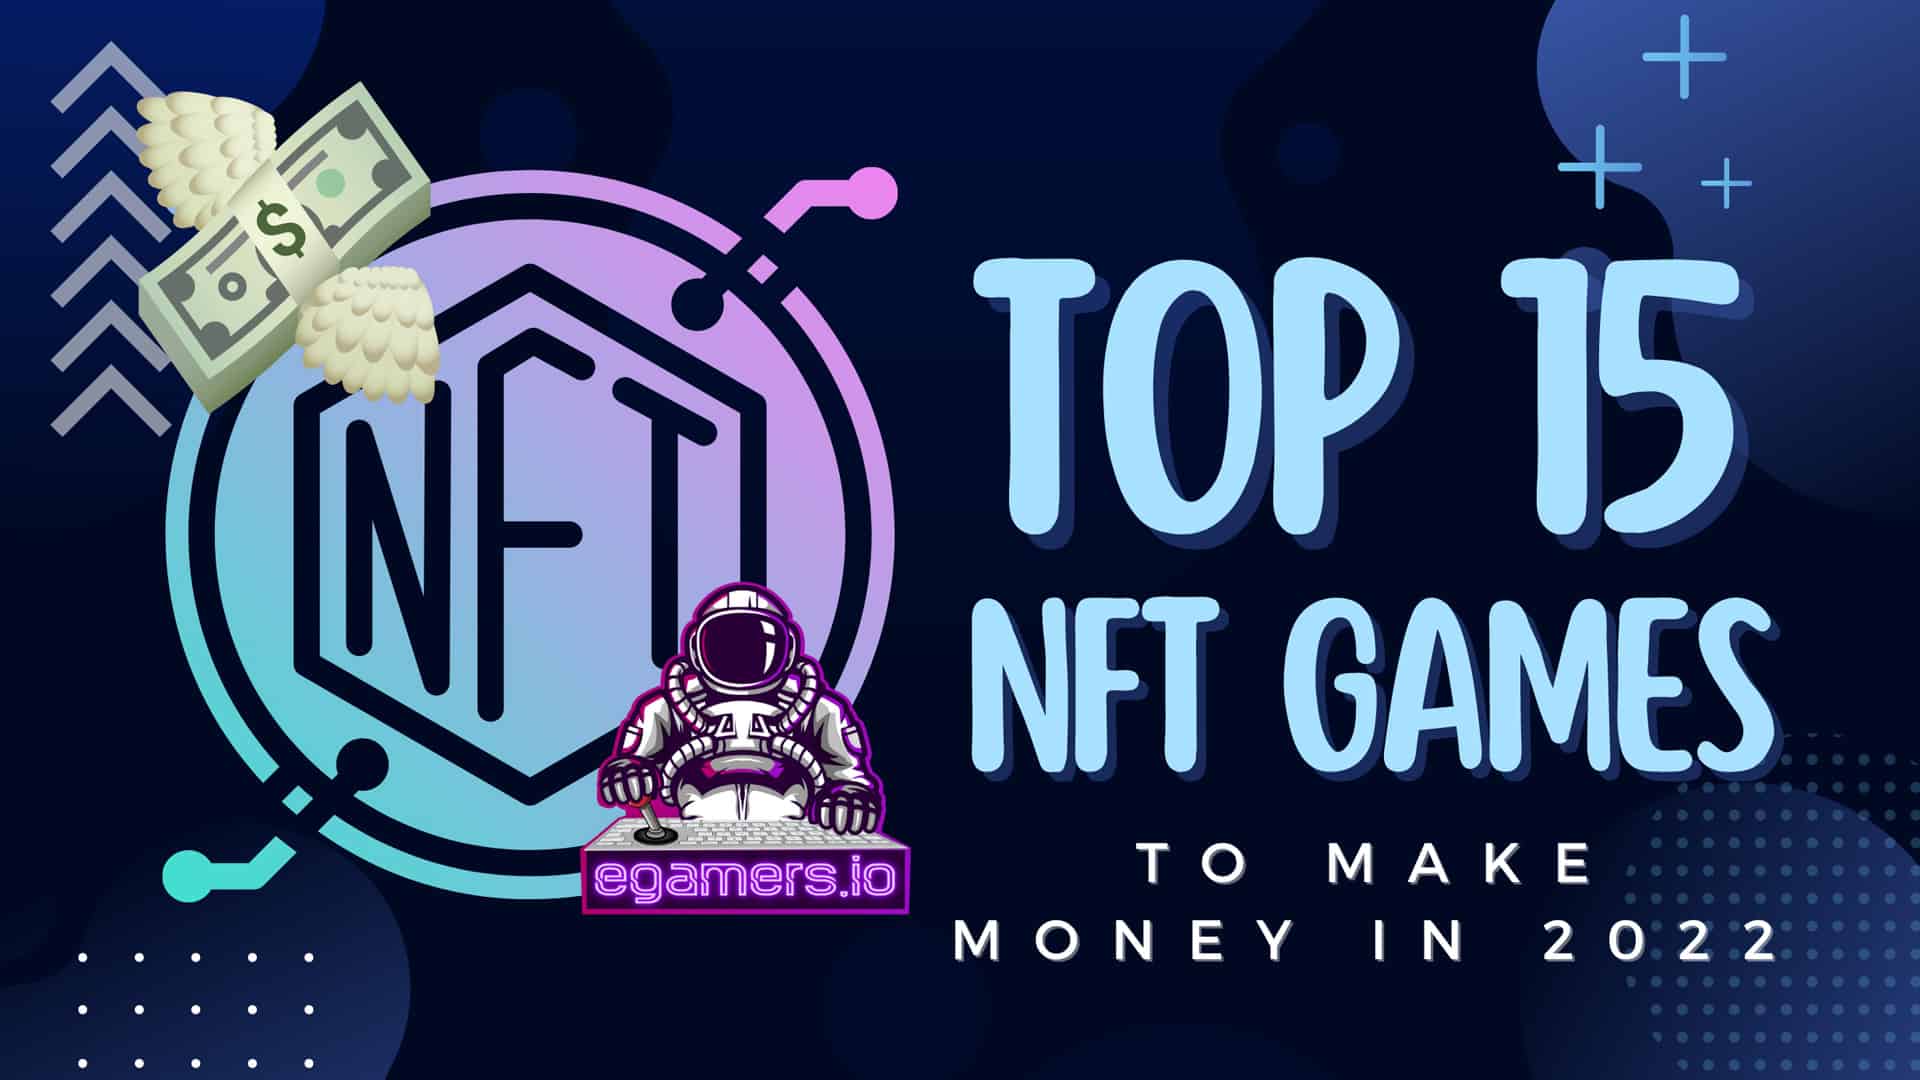 Top 15 NFT Games to Make Money in 2022